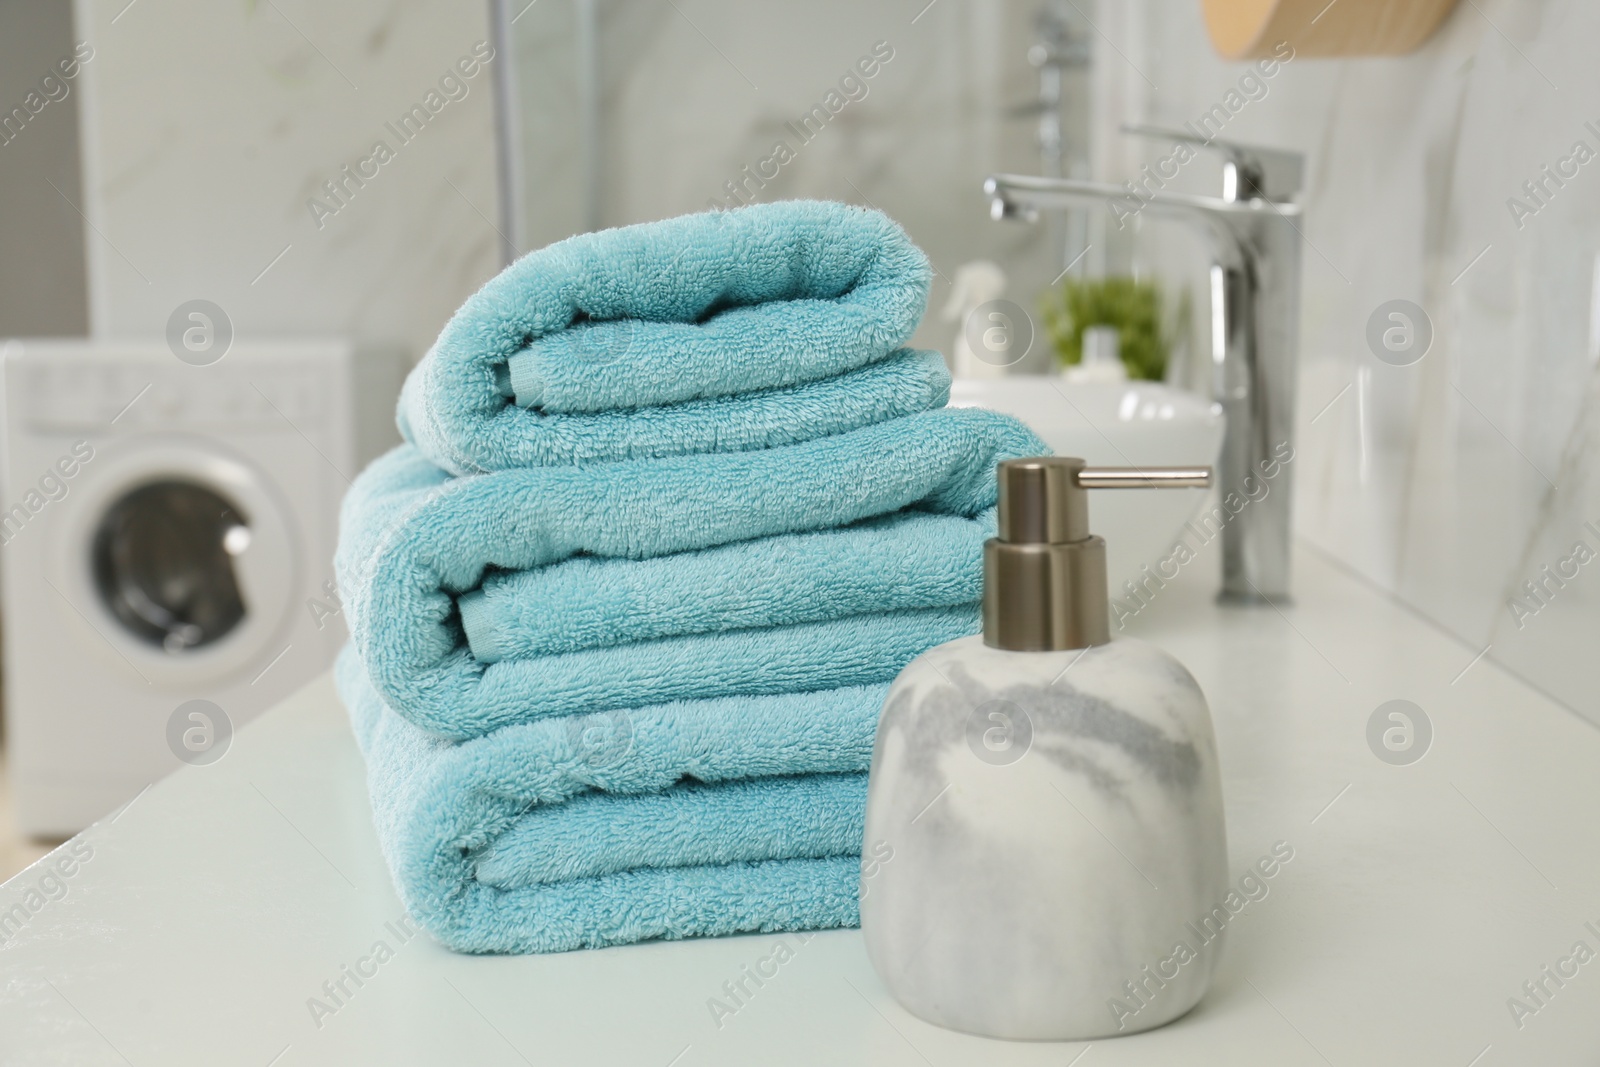 Photo of Stack of clean towels and soap dispenser on countertop in bathroom